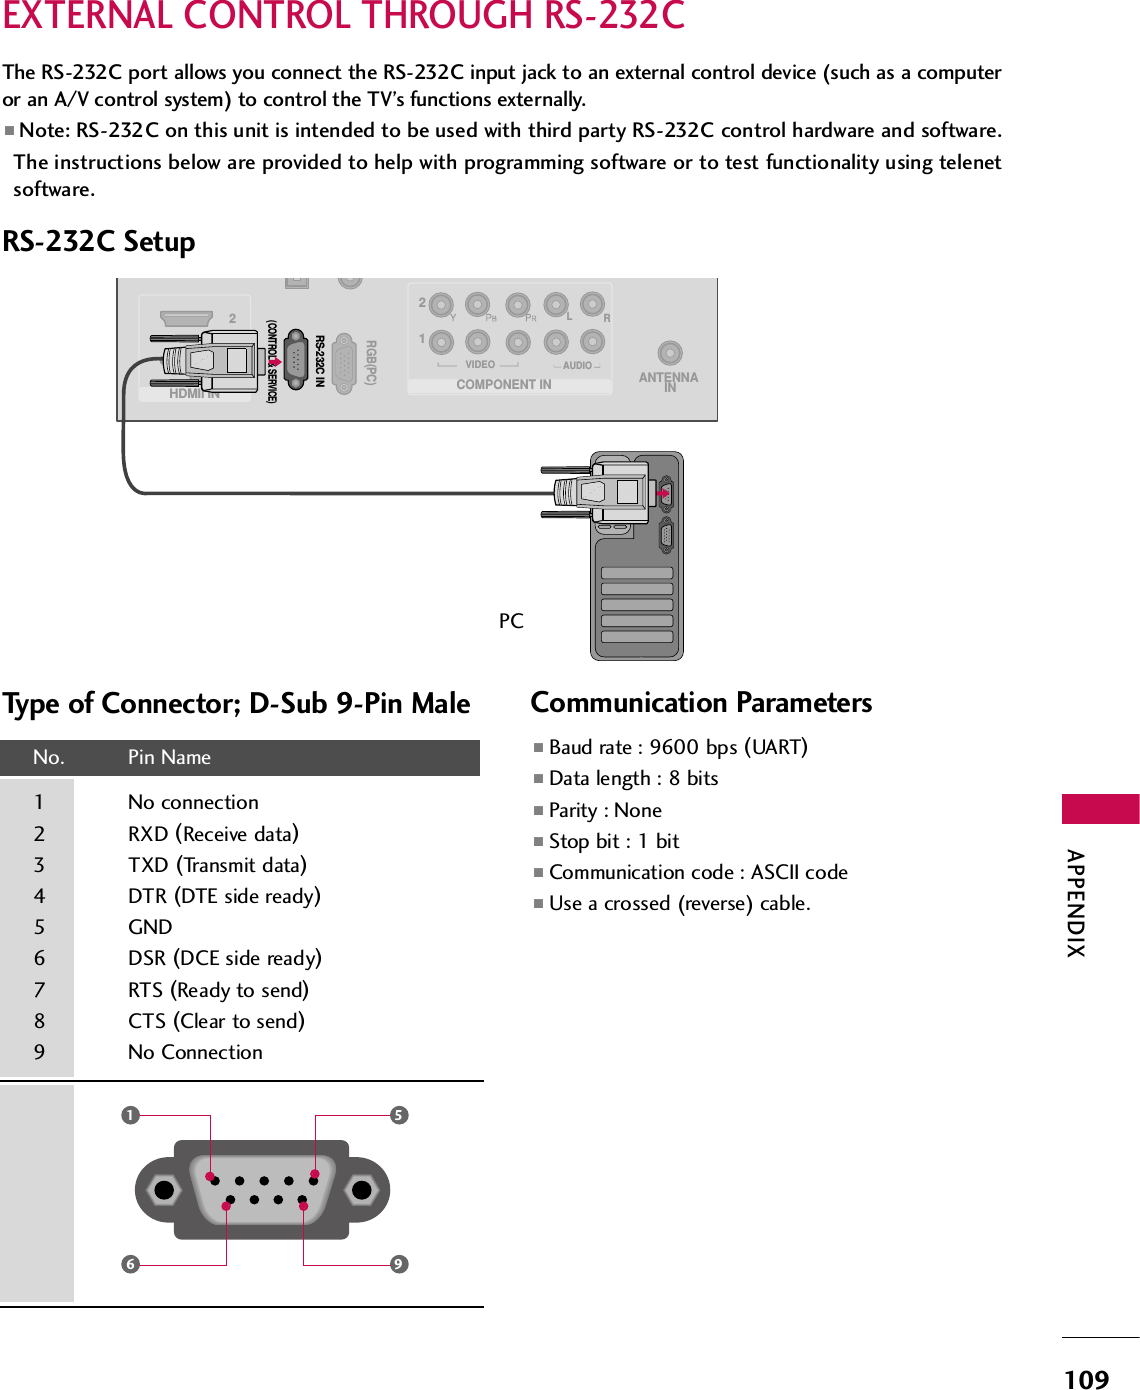 APPENDIX109EXTERNAL CONTROL THROUGH RS-232CRS-232C SetupThe RS-232C port allows you connect the RS-232C input jack to an external control device (such as a computeror an A/V control system) to control the TV’s functions externally.■Note: RS-232C on this unit is intended to be used with third party RS-232C control hardware and software.The instructions below are provided to help with programming software or to test functionality using telenetsoftware.RGB(PC)ANTENNA IN12COMPONENT INVIDEOAUDIOLRHDMII IN 21RS-232C IN(CONTROL &amp; SERVICE)Type of Connector; D-Sub 9-Pin MaleNo. Pin Name1 No connection2 RXD (Receive data)3 TXD (Transmit data)4 DTR (DTE side ready)5 GND6 DSR (DCE side ready)7 RTS (Ready to send)8 CTS (Clear to send)9 No Connection1659PCCommunication Parameters■Baud rate : 9600 bps (UART)■Data length : 8 bits■Parity : None■Stop bit : 1 bit■Communication code : ASCII code■Use a crossed (reverse) cable.